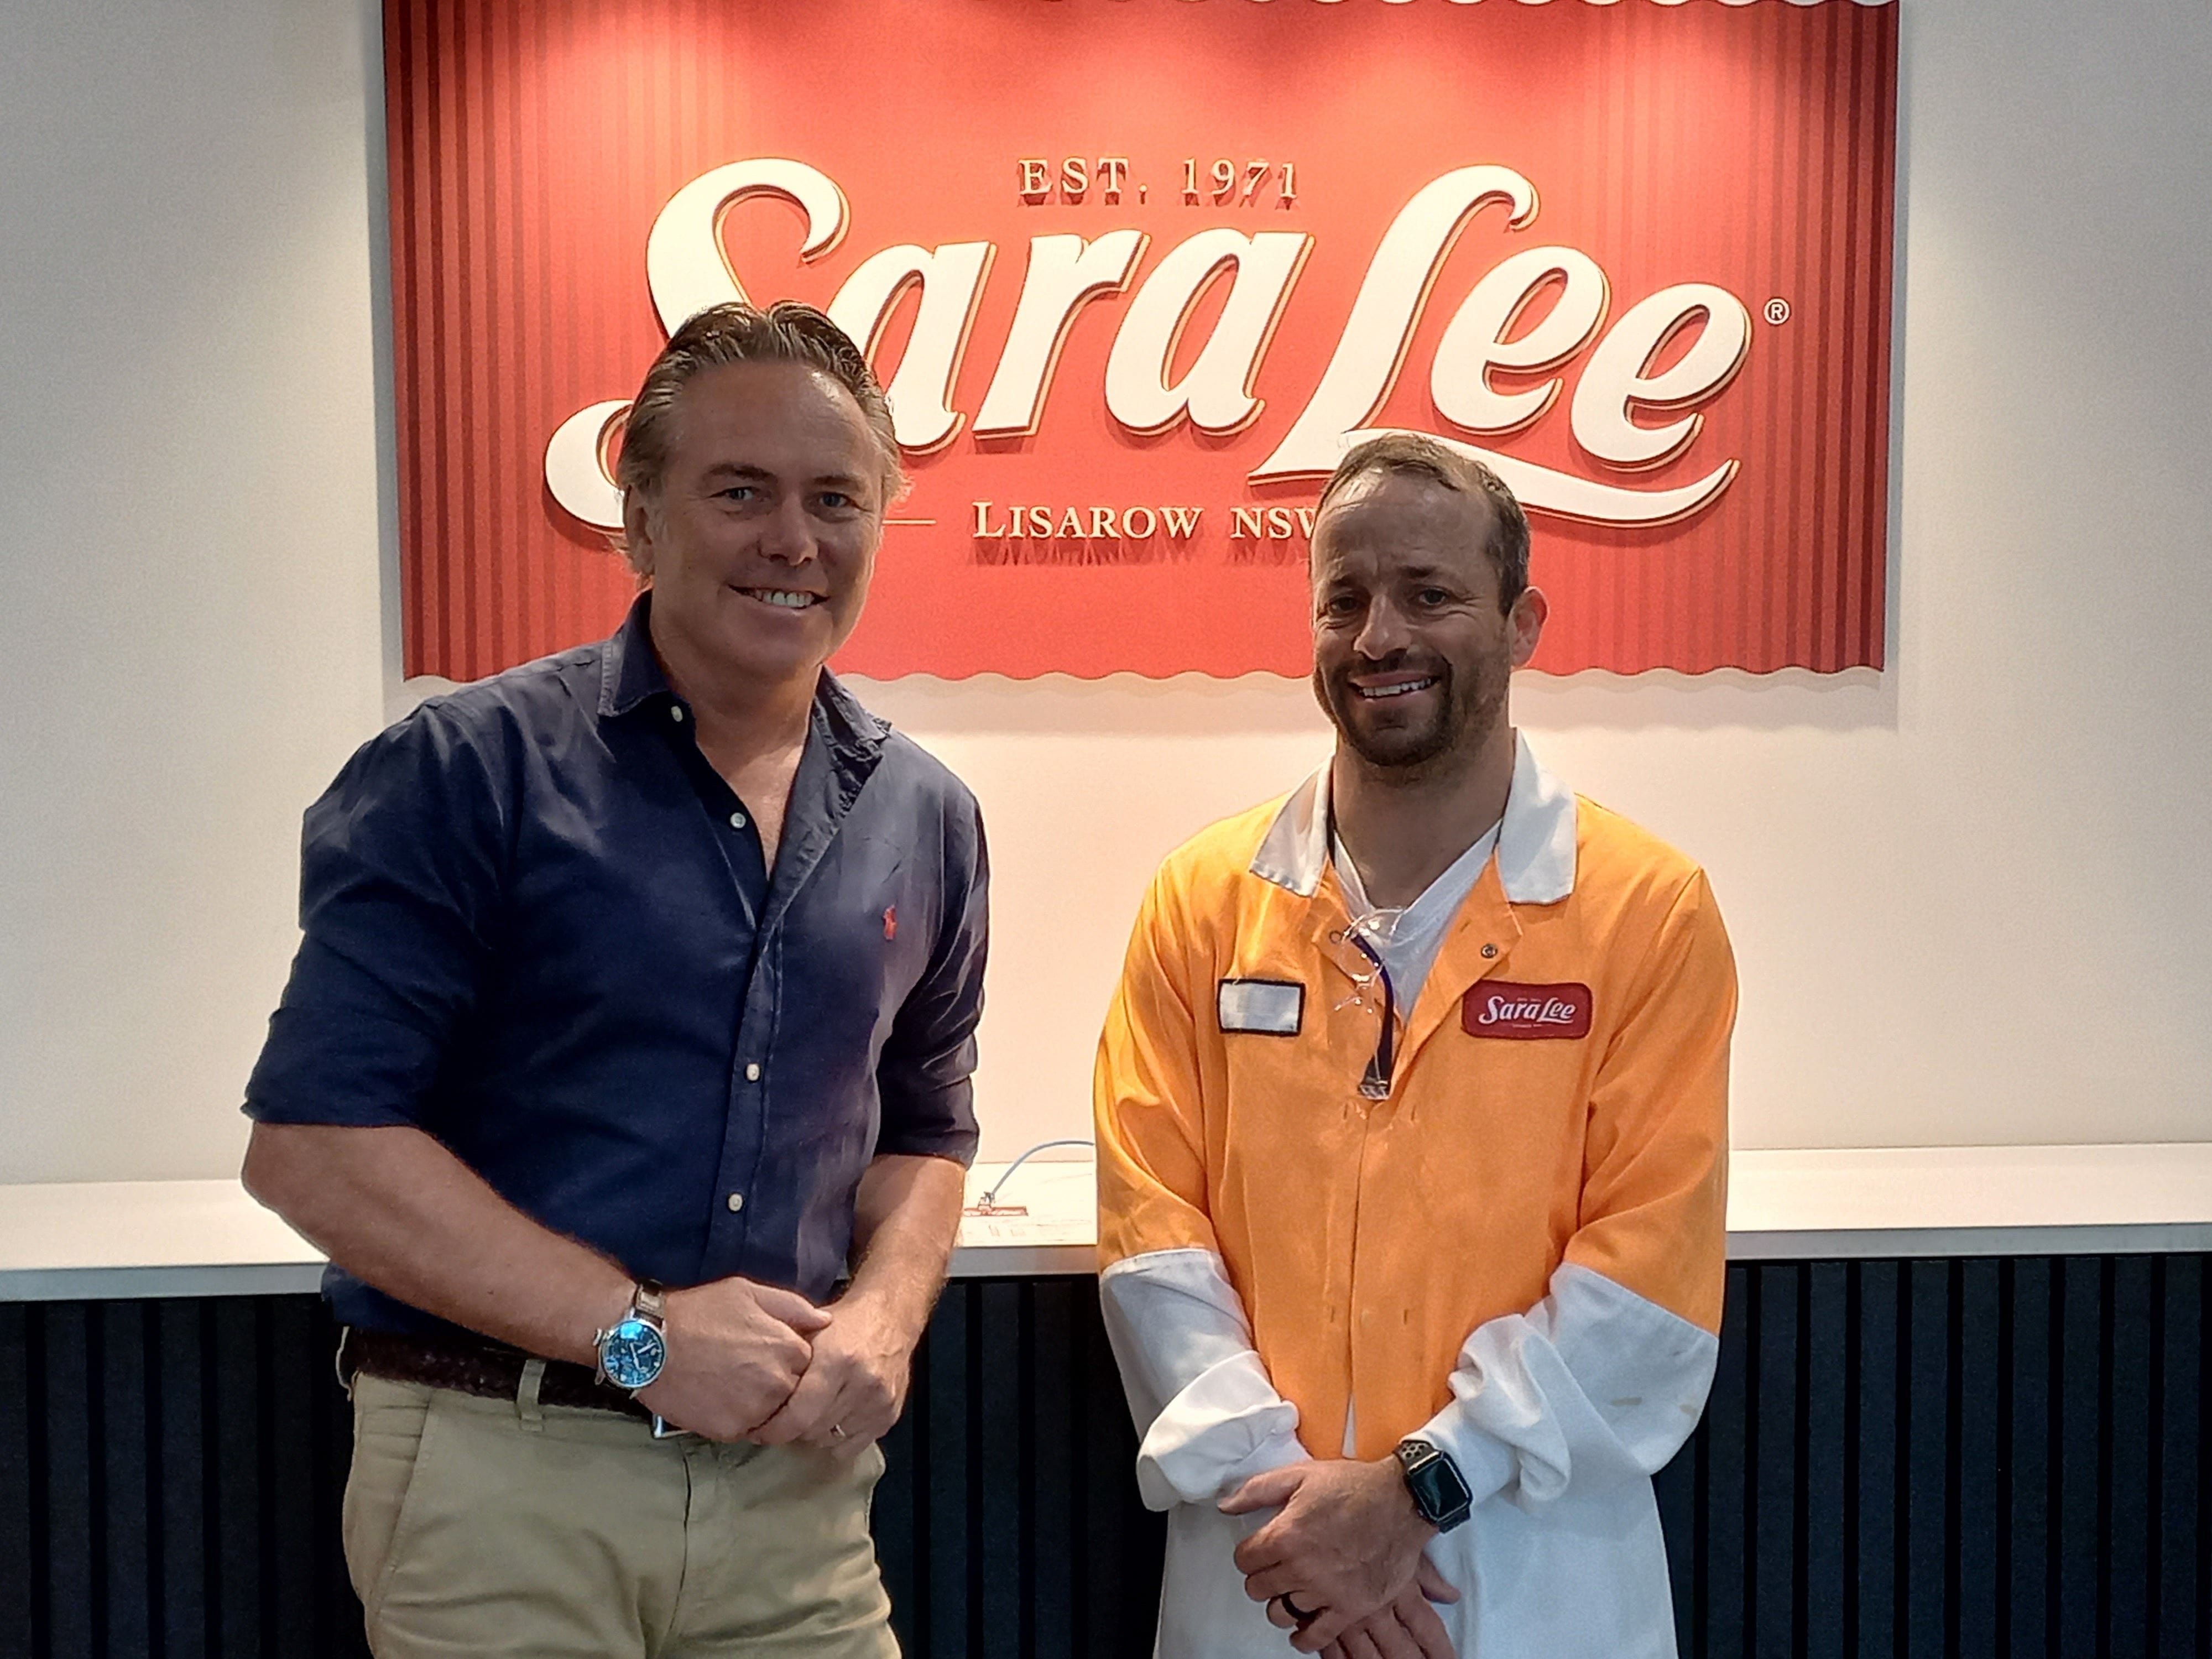 New life for Sara Lee with new owners